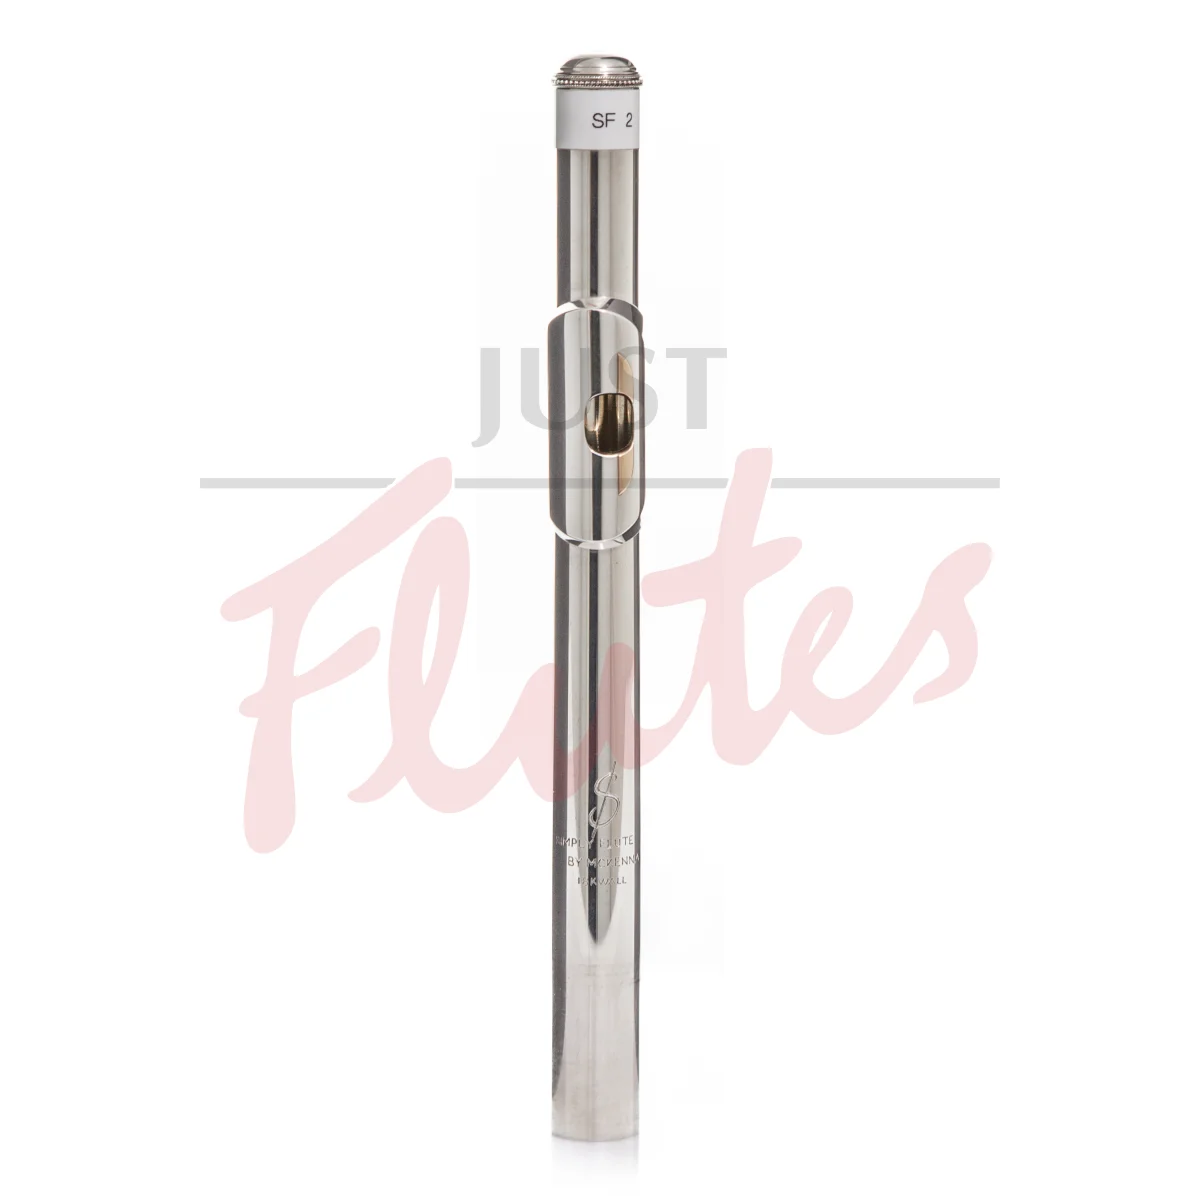 Pre-Owned McKenna Flutes SF 18k Riser and Wings Flute Headjoint